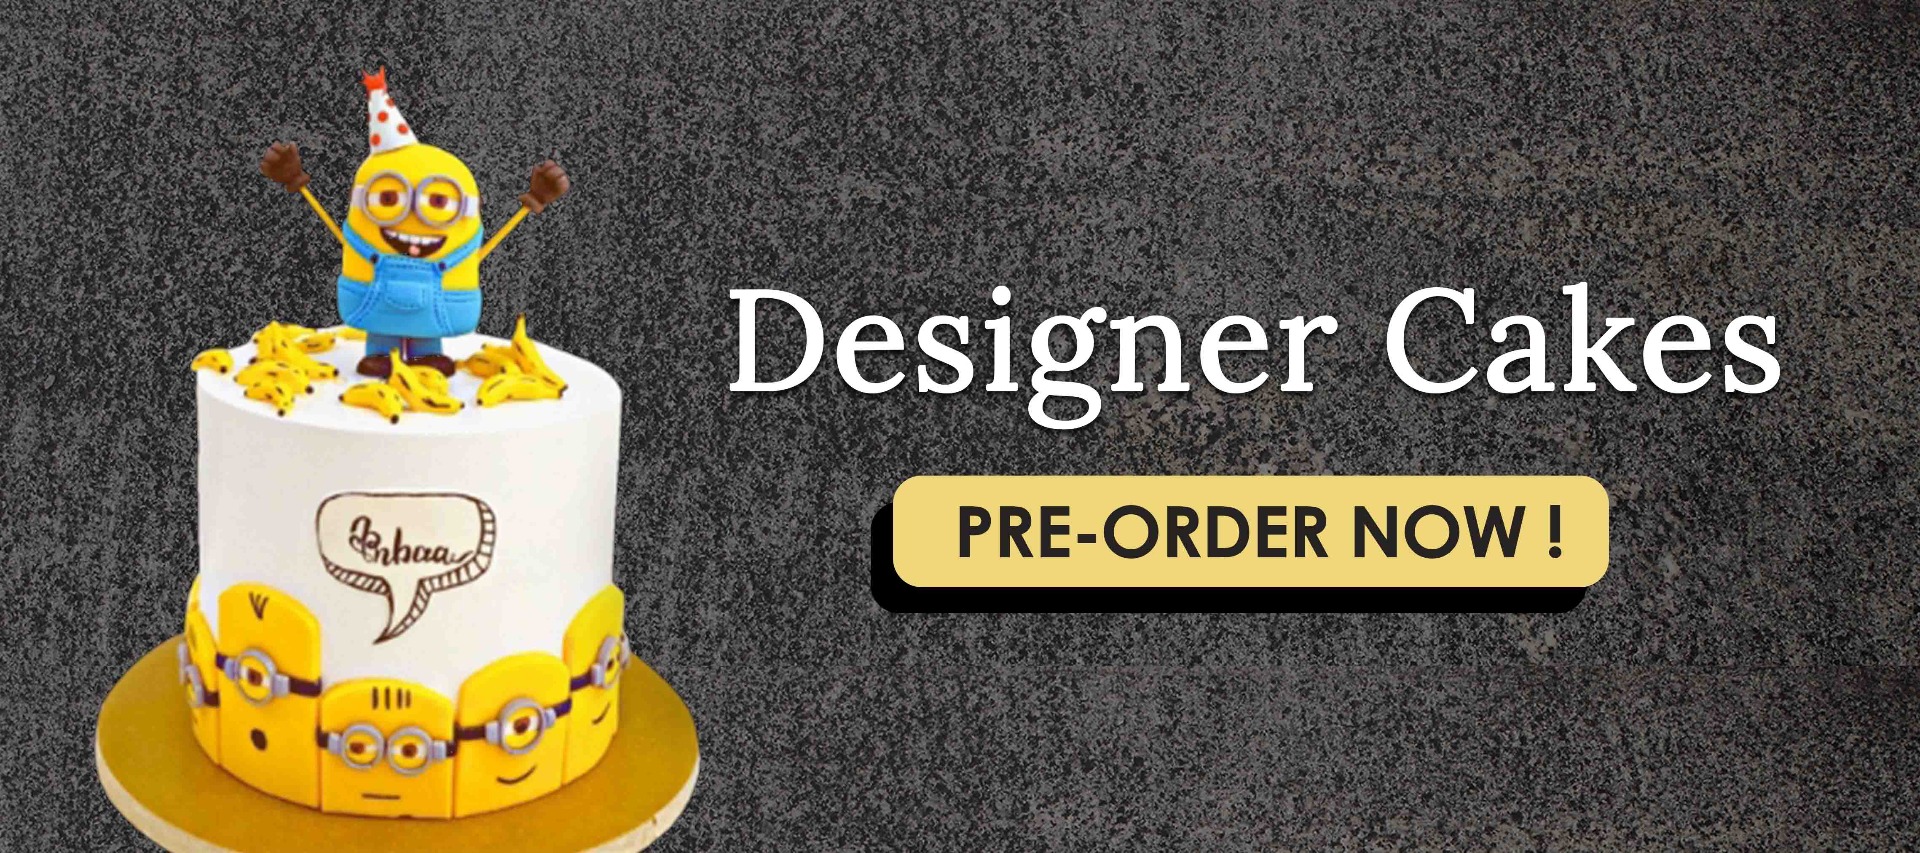 5 Creative Ways To Decorate A Cake Other Than Frosting - Zeroin Academy